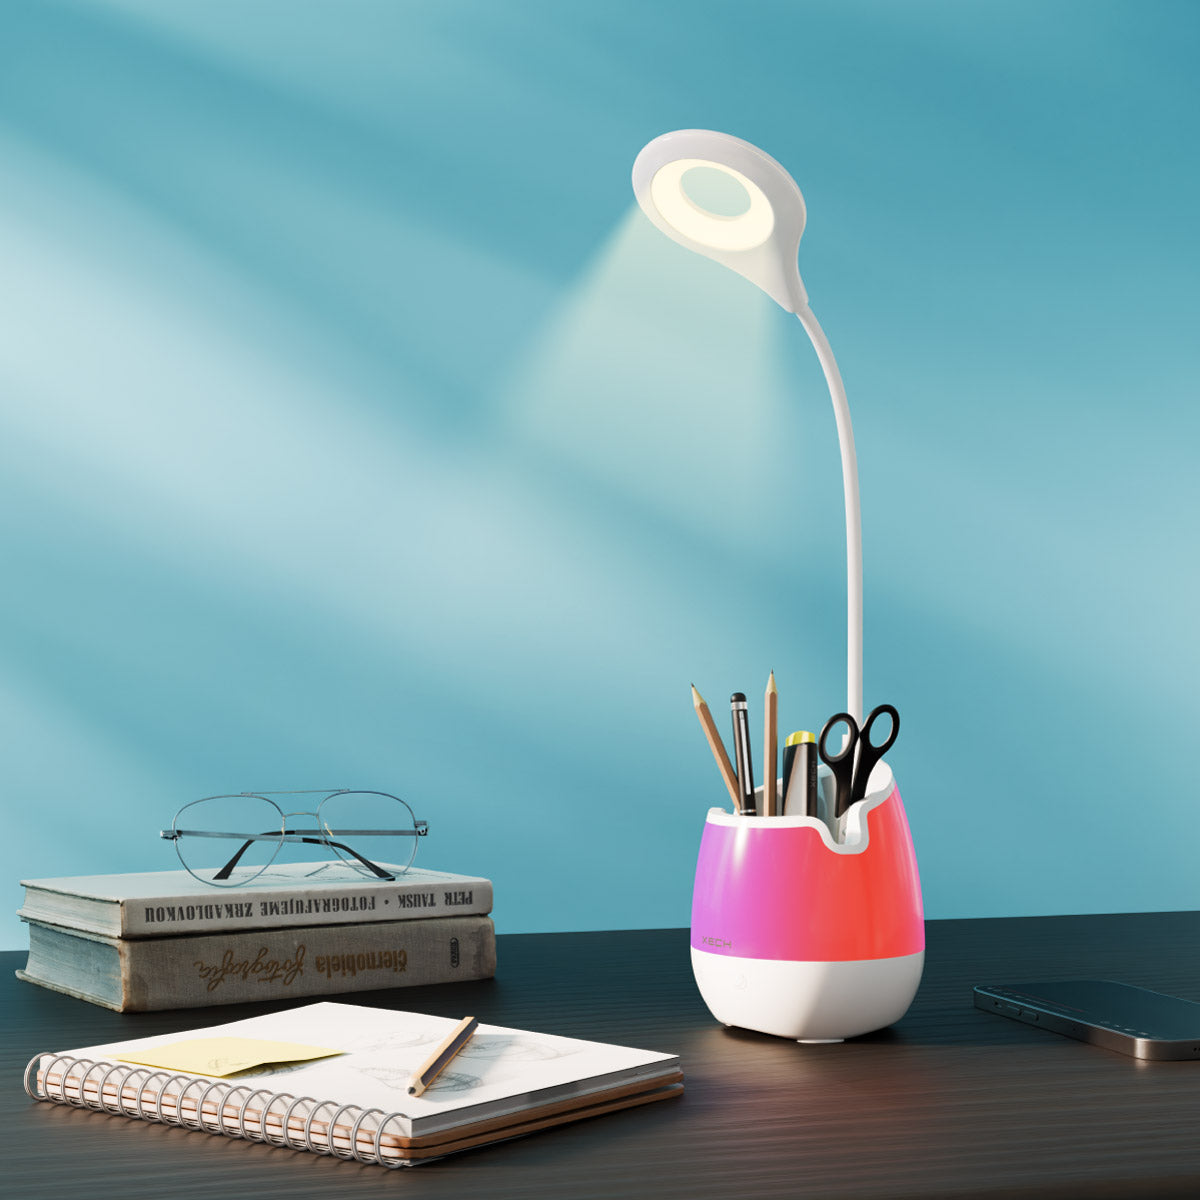 xech table lamp for study led light with pen stand desktop accessories corporate gifting ideas lumos